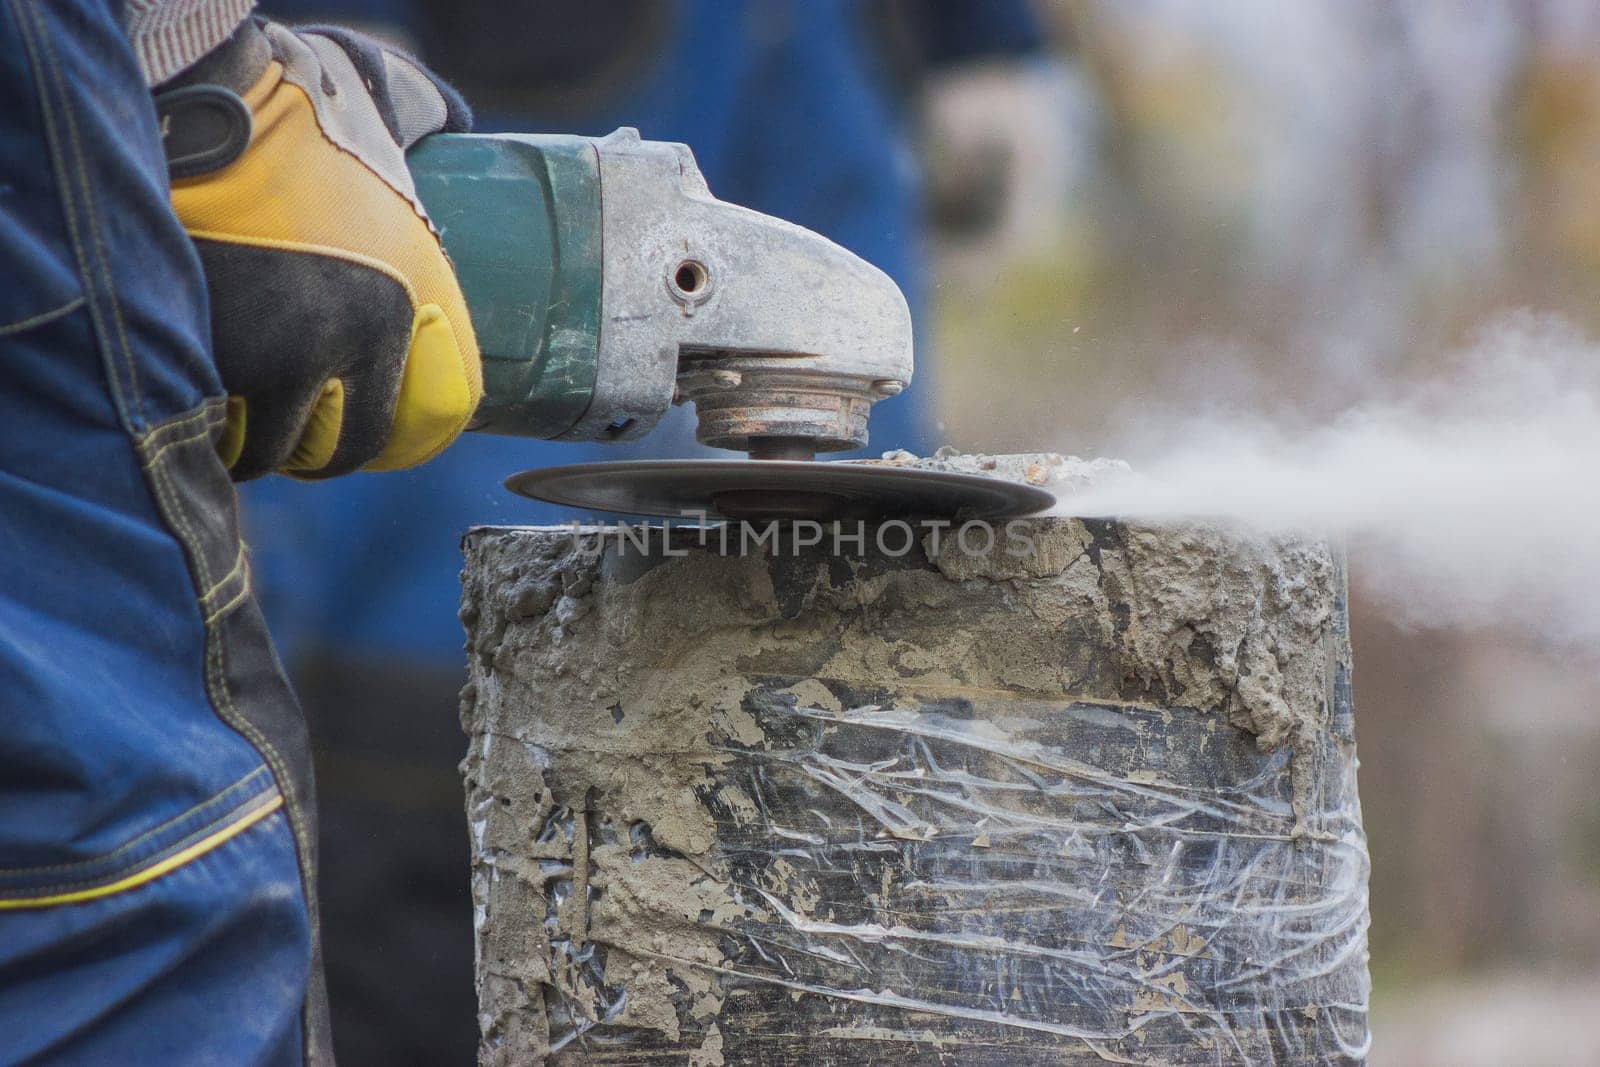 Working circular saw outdoors, sawdust flying around by Studia72